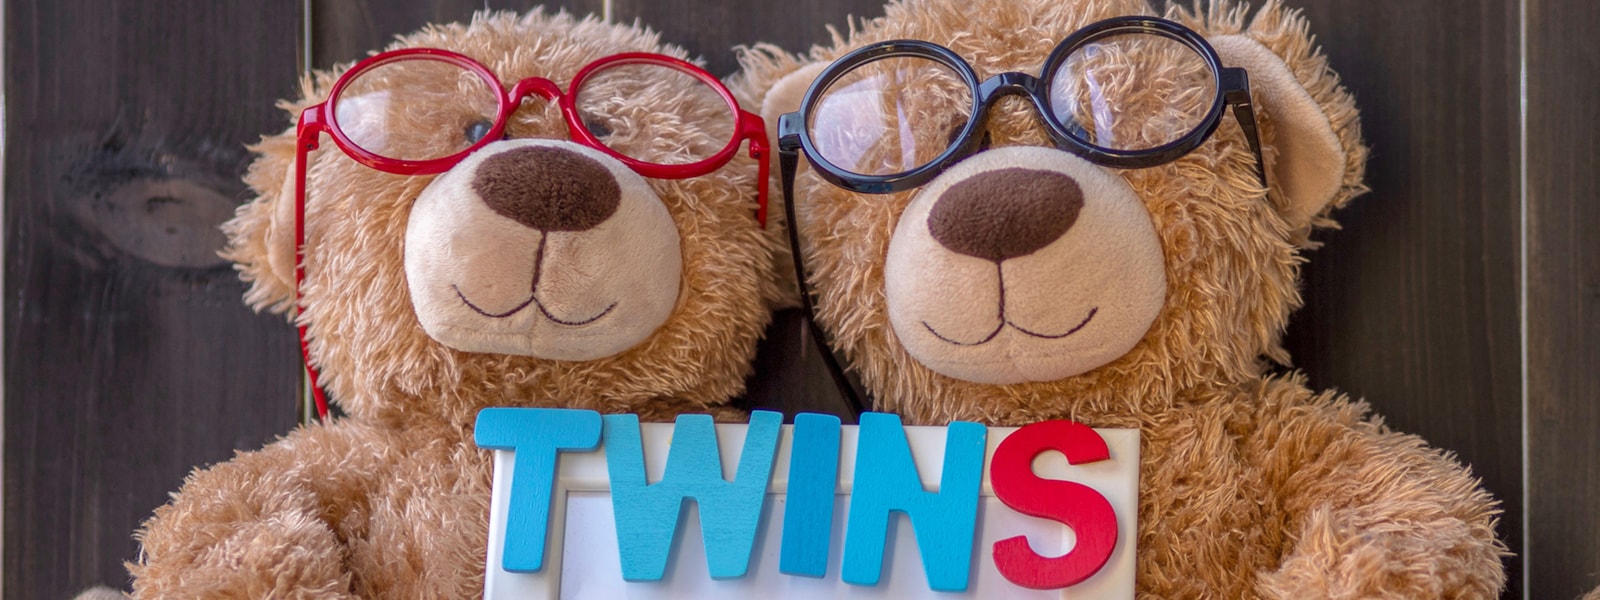 Bears that are twins 